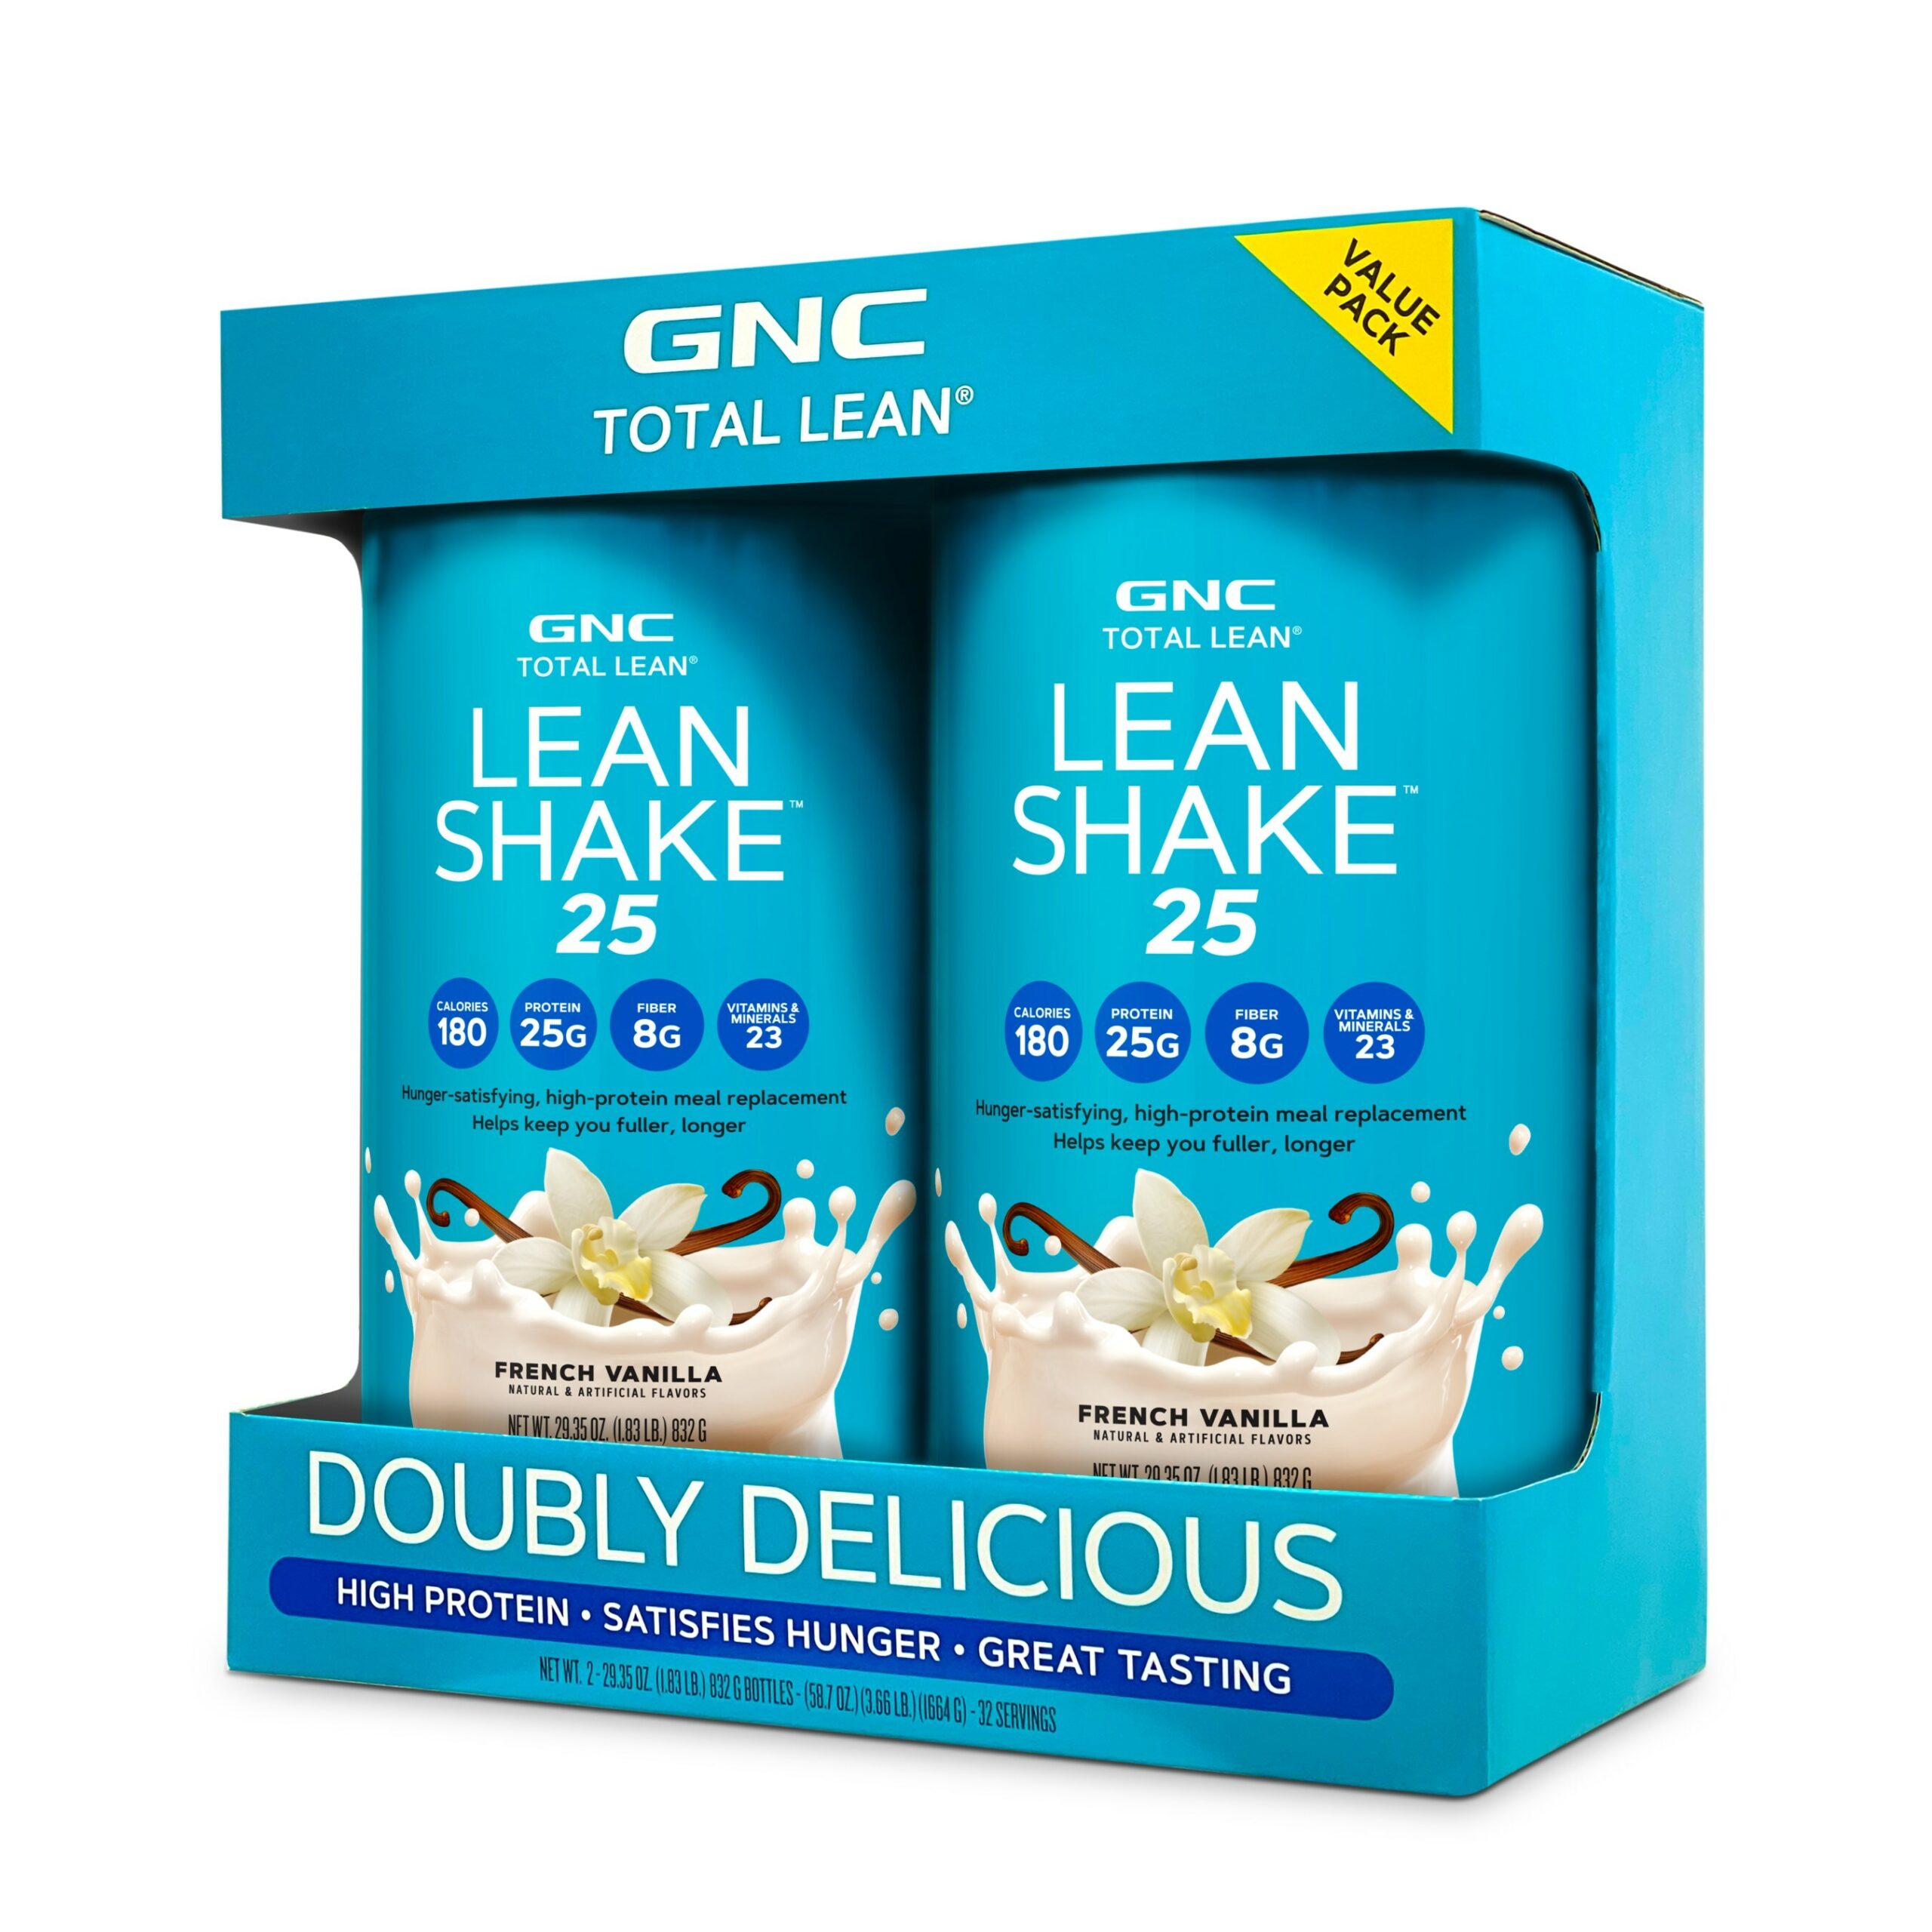 GNC Launches New Total Lean® Lean Shake™ 25 Bundle For A Limited-Time